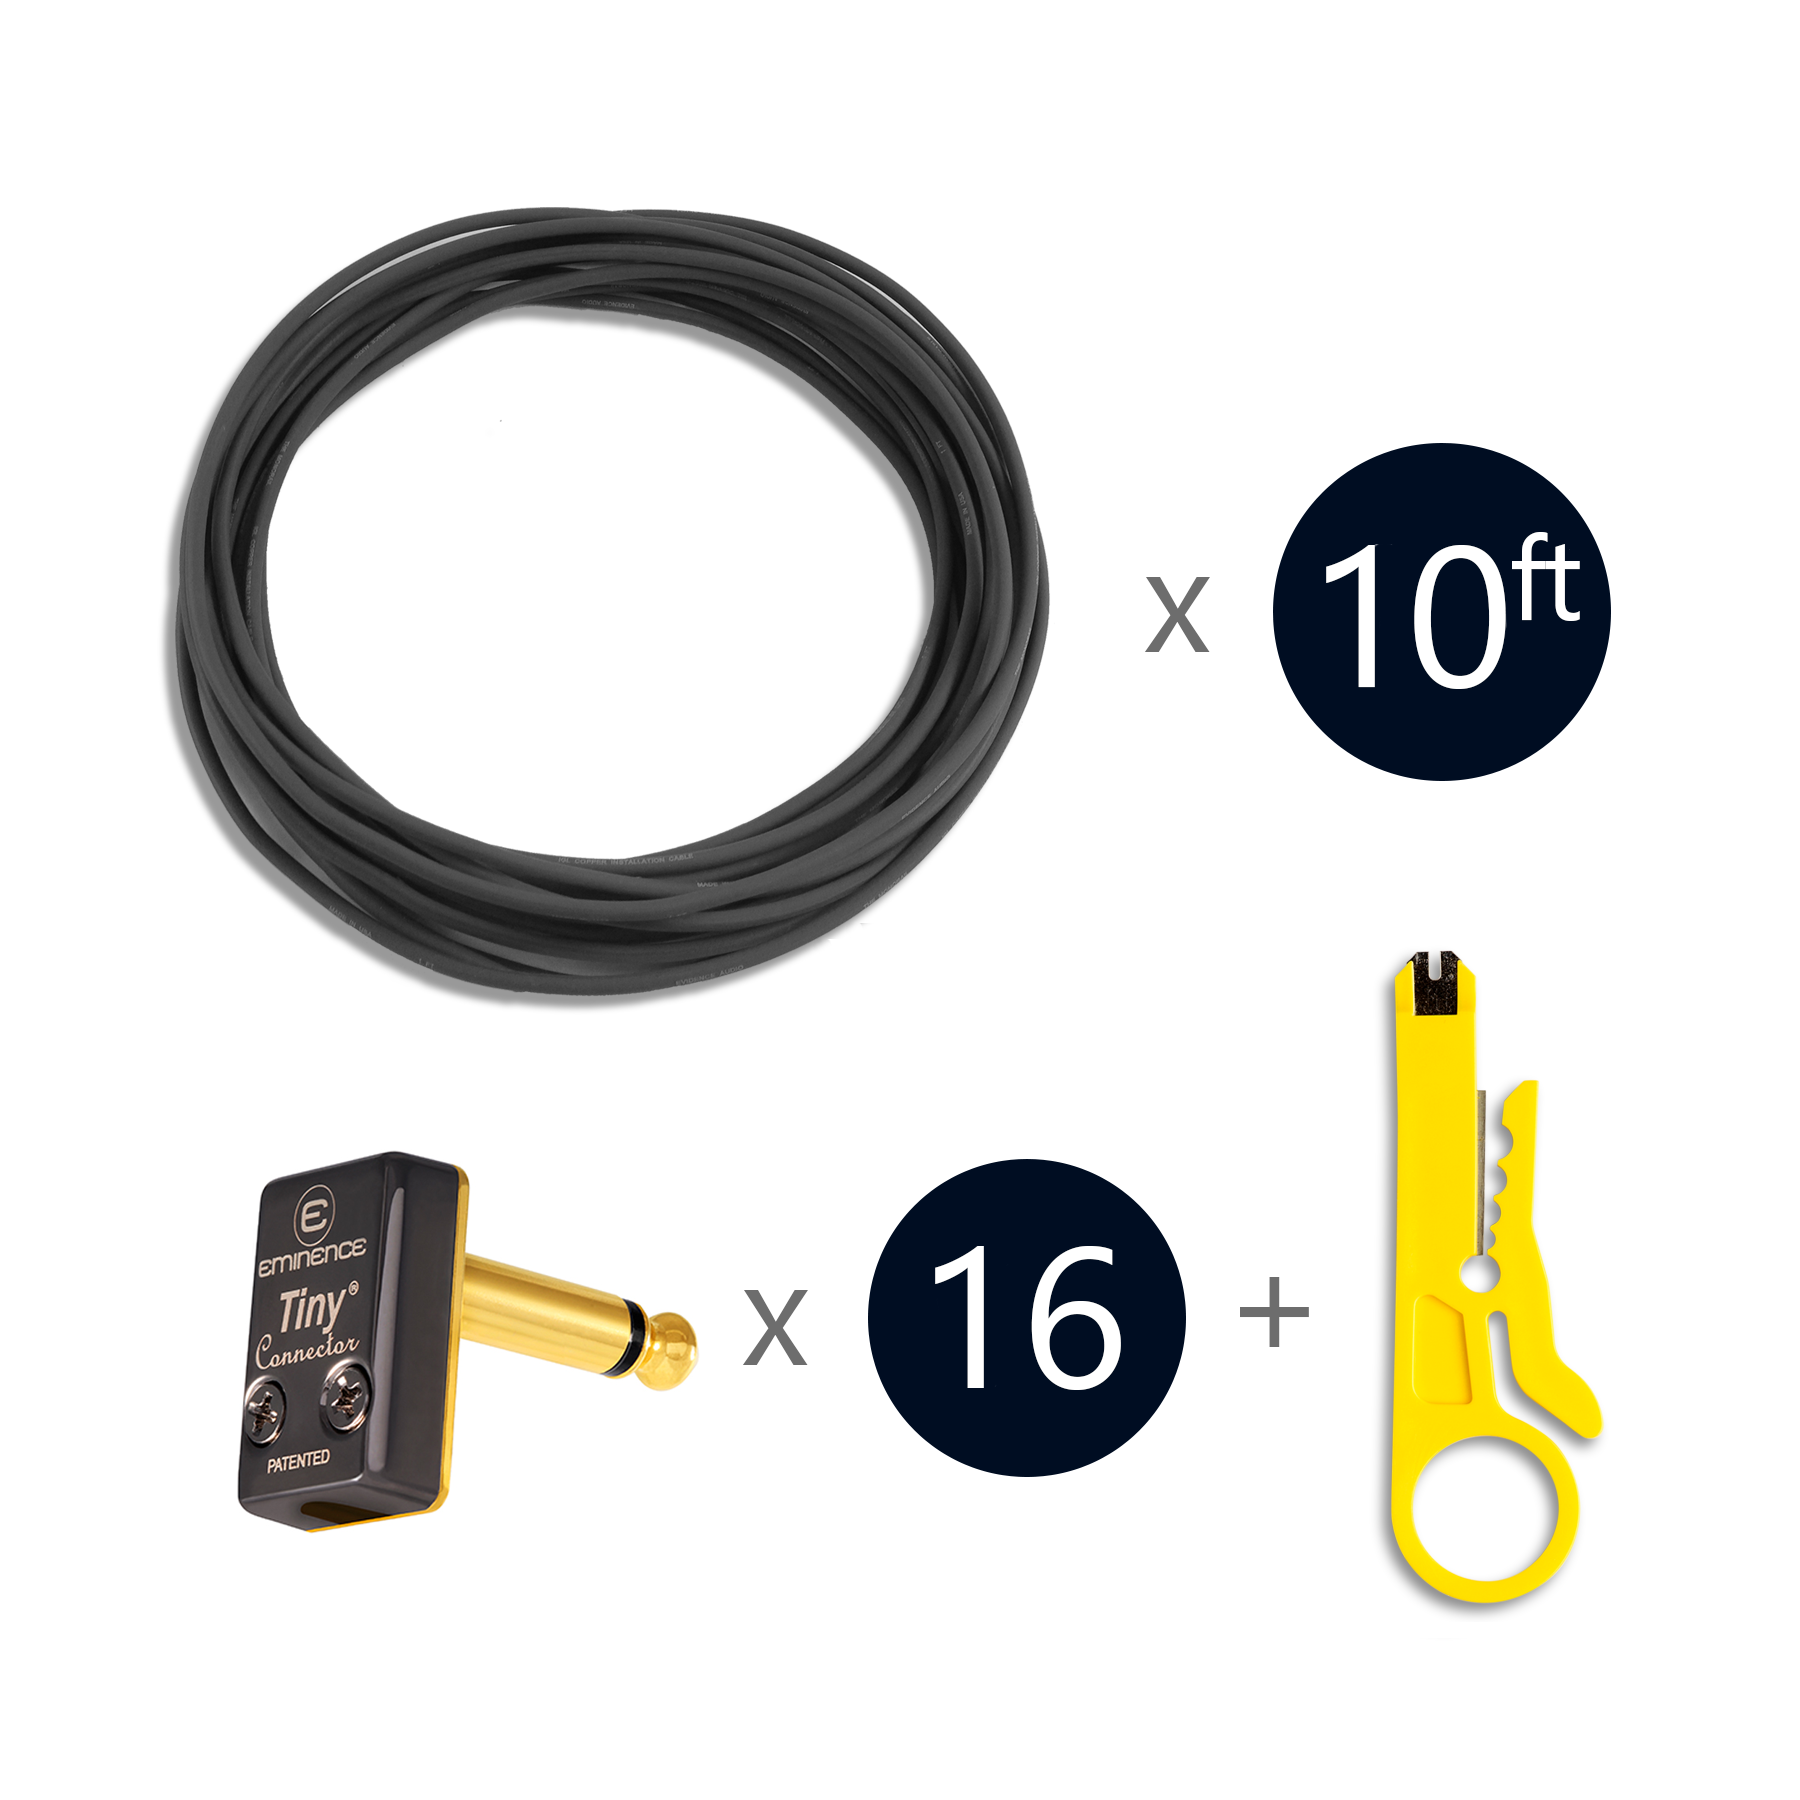 10 ft Evidence Audio Monorail cable + 16 x Eminence Tiny connector Plug + cable cutter tool